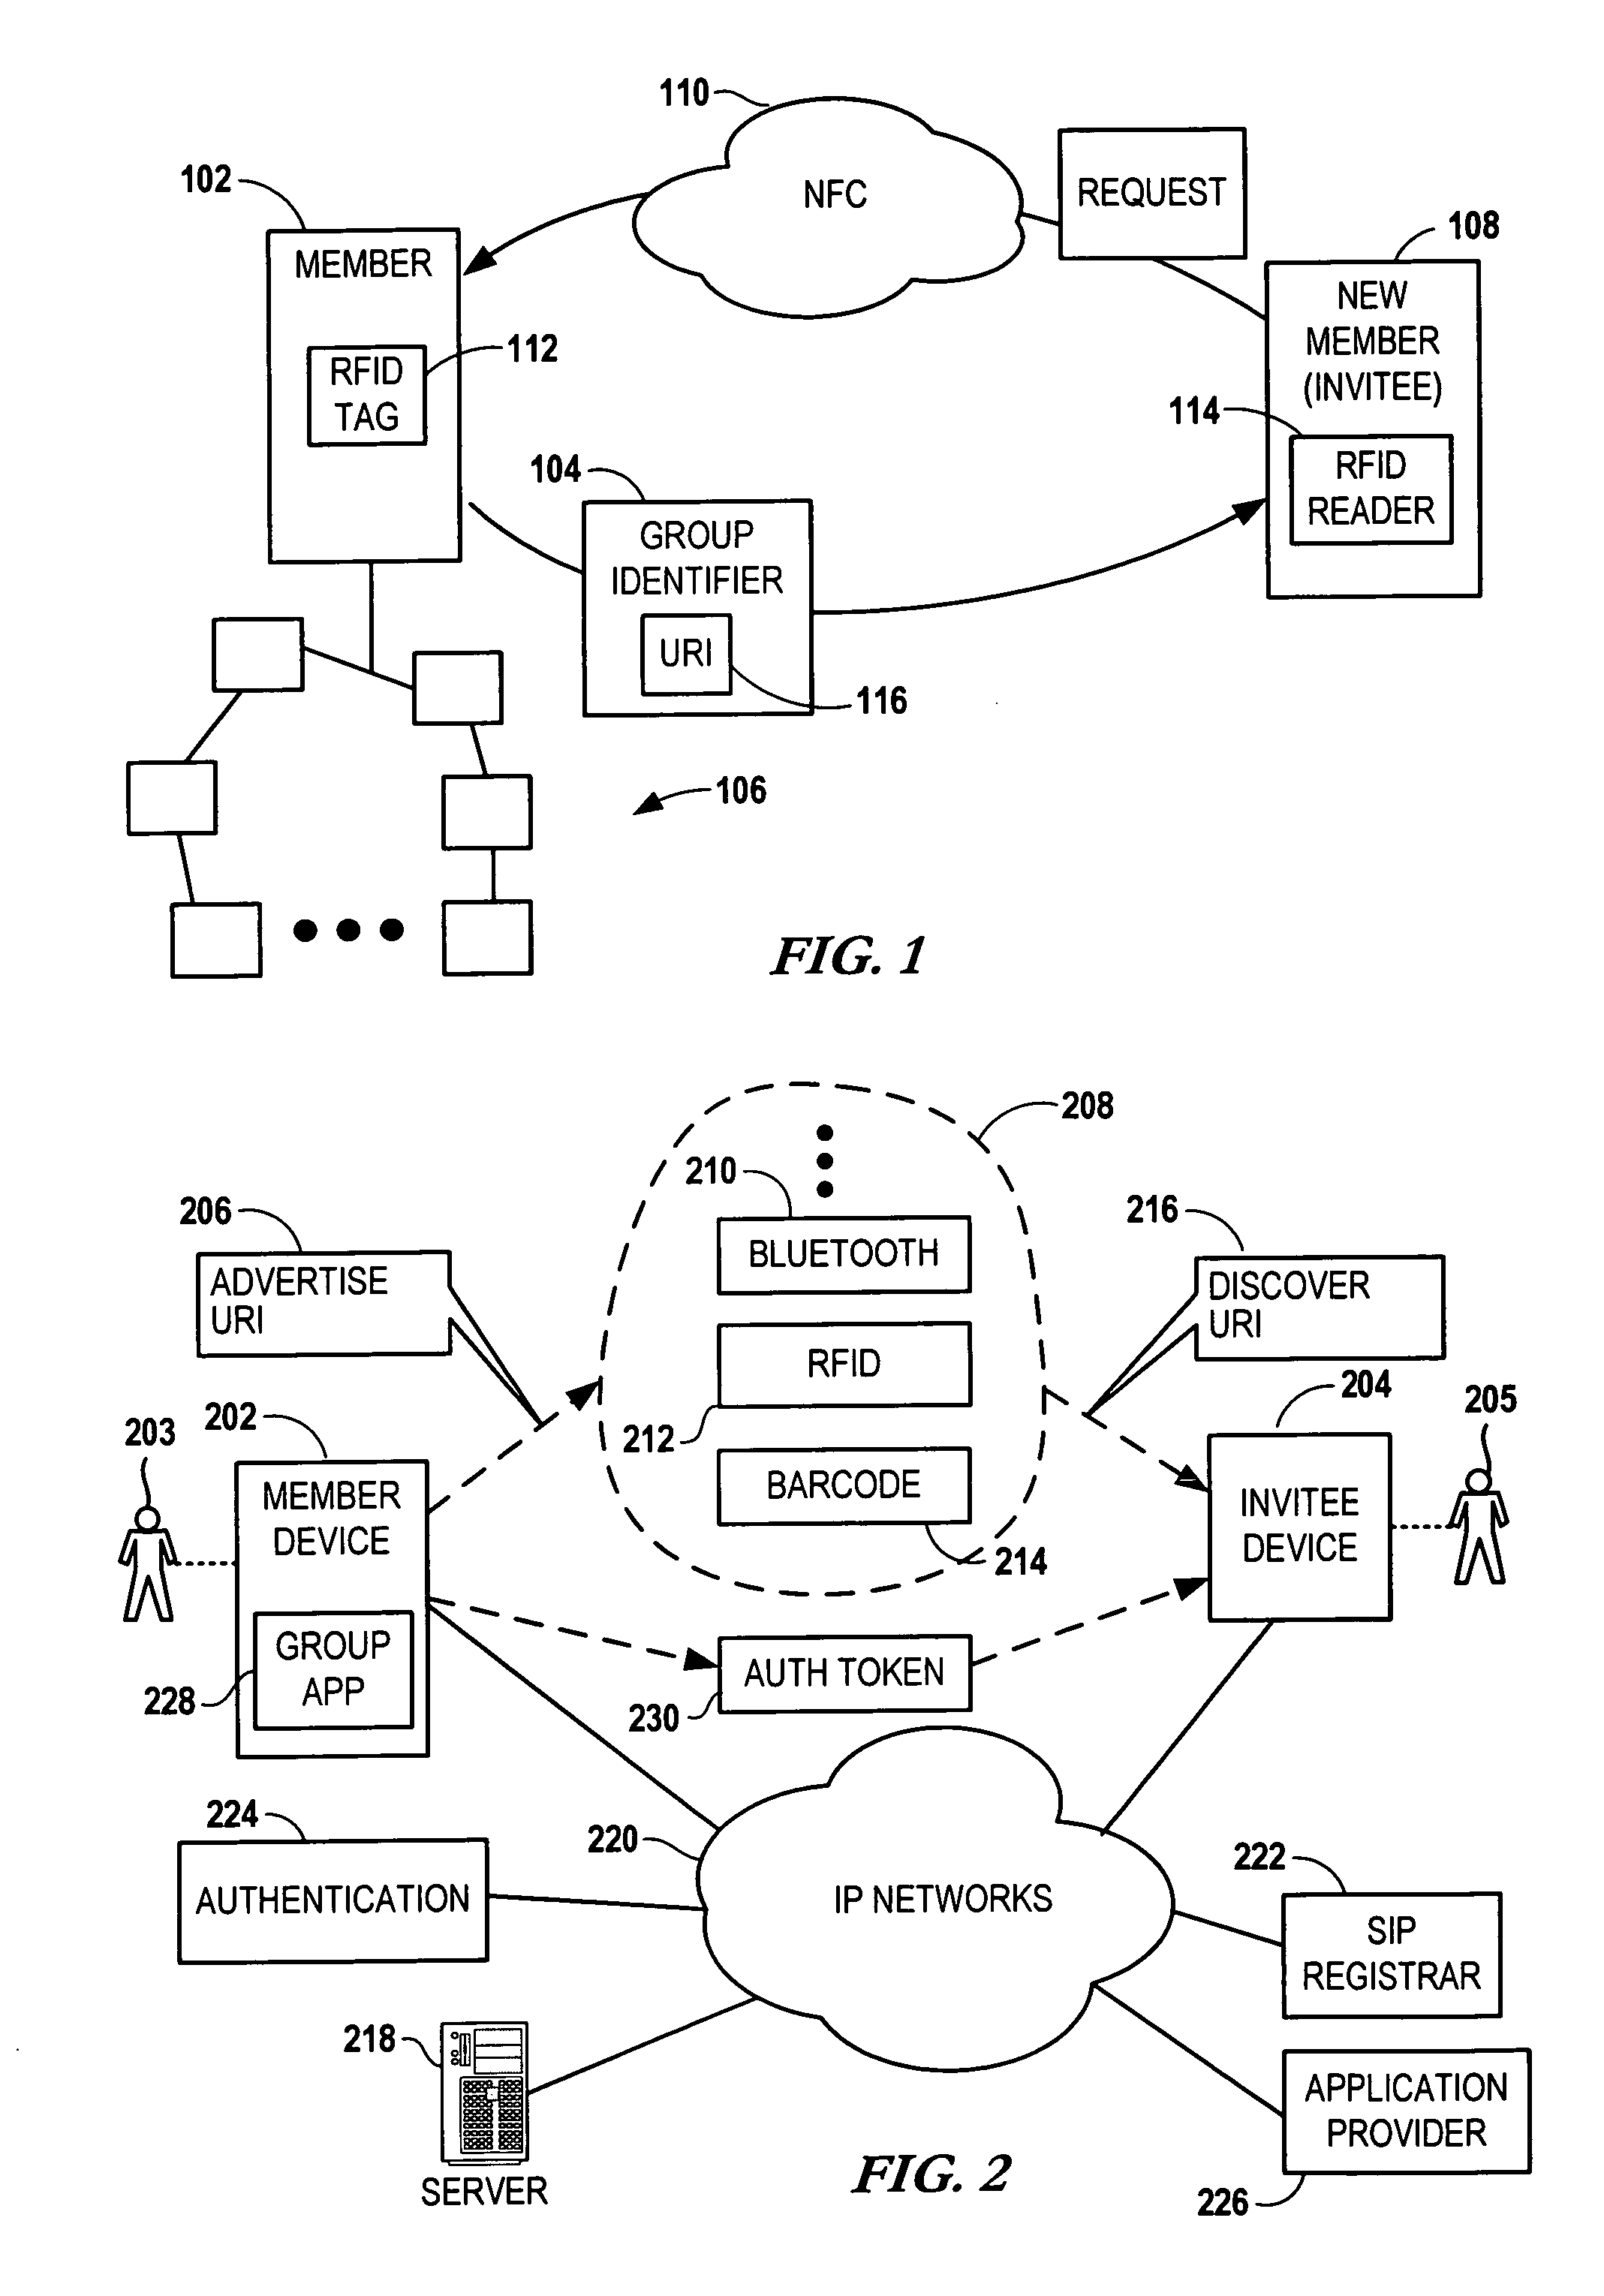 Group formation using mobile computing devices